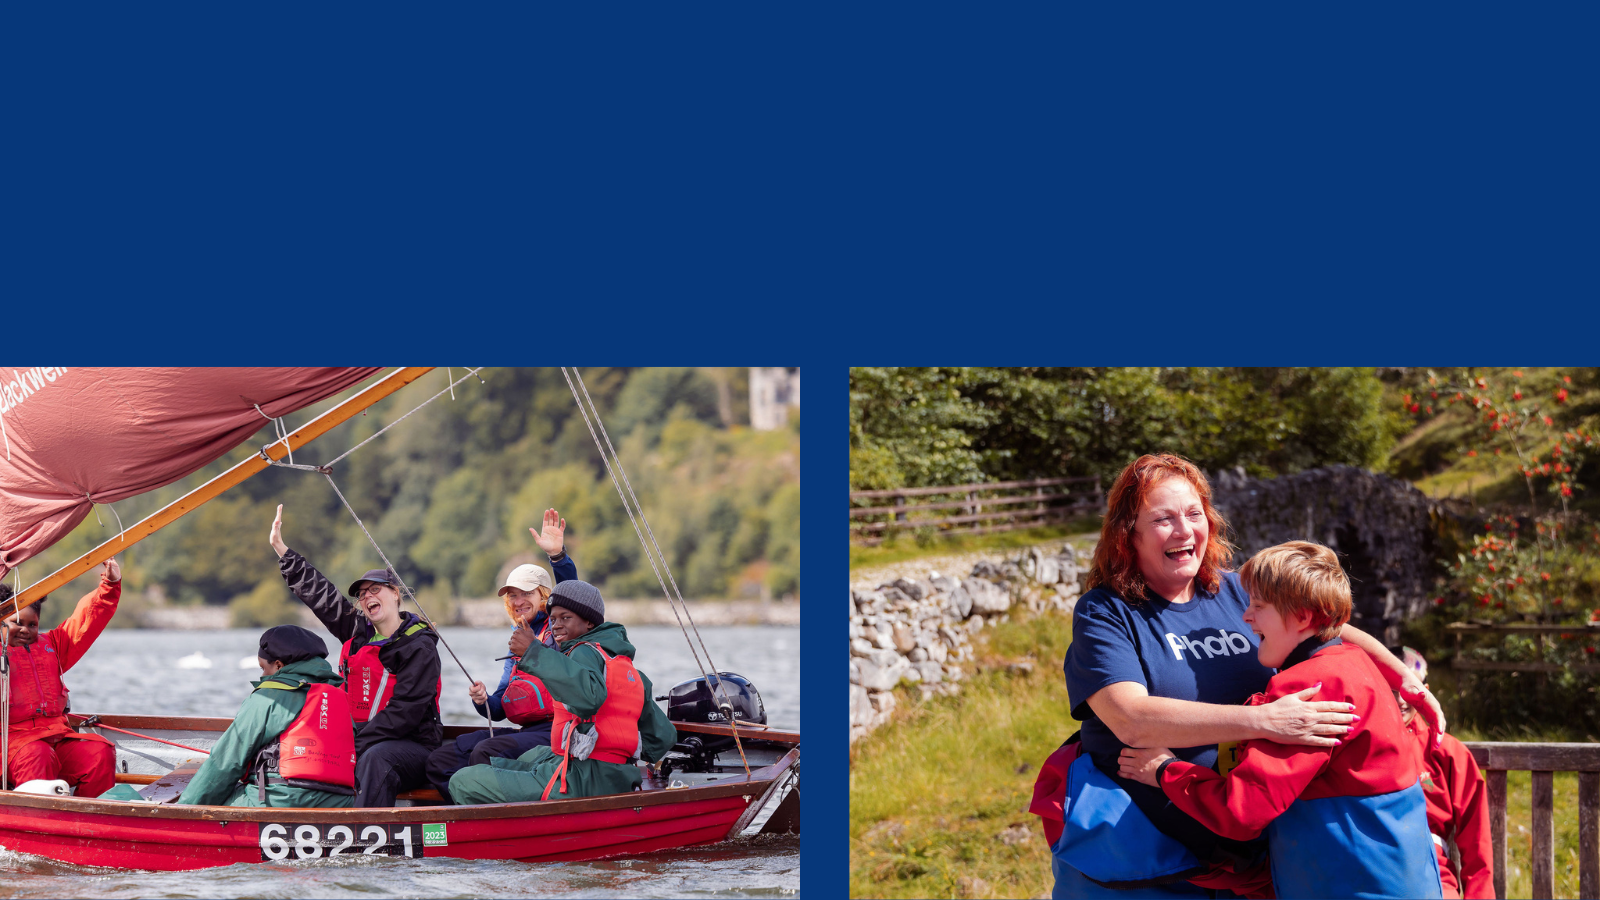 The left-hand image is of a group of young-adults in red life jackets, sailing in a red sailing boat. The right-hand side image is of a woman with red hair, who is a Phab volunteer, hugging one of the children. 